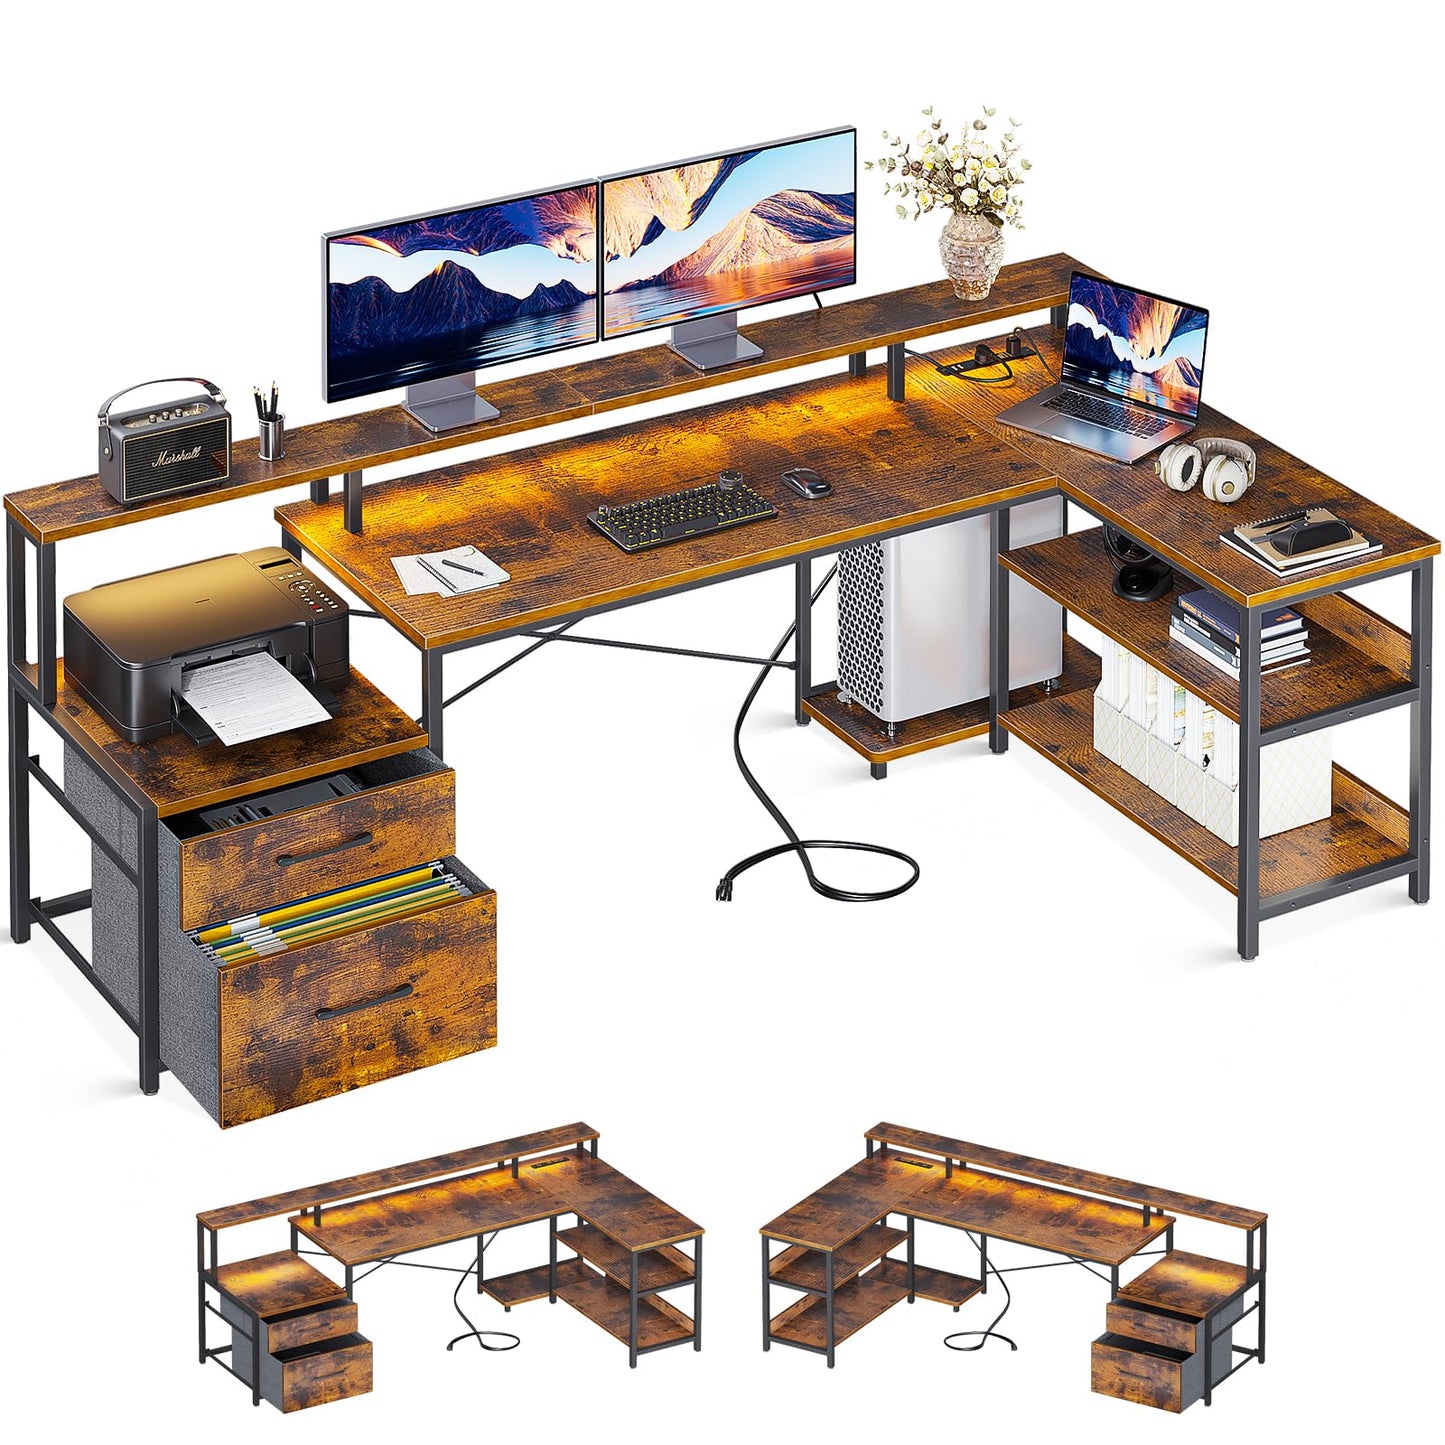 ODK L Shaped Desk with File Drawer, 75" Reversible L Shaped Computer Desk with Power Outlet & LED Strip, Office Desk with Storage Shelves, Gaming